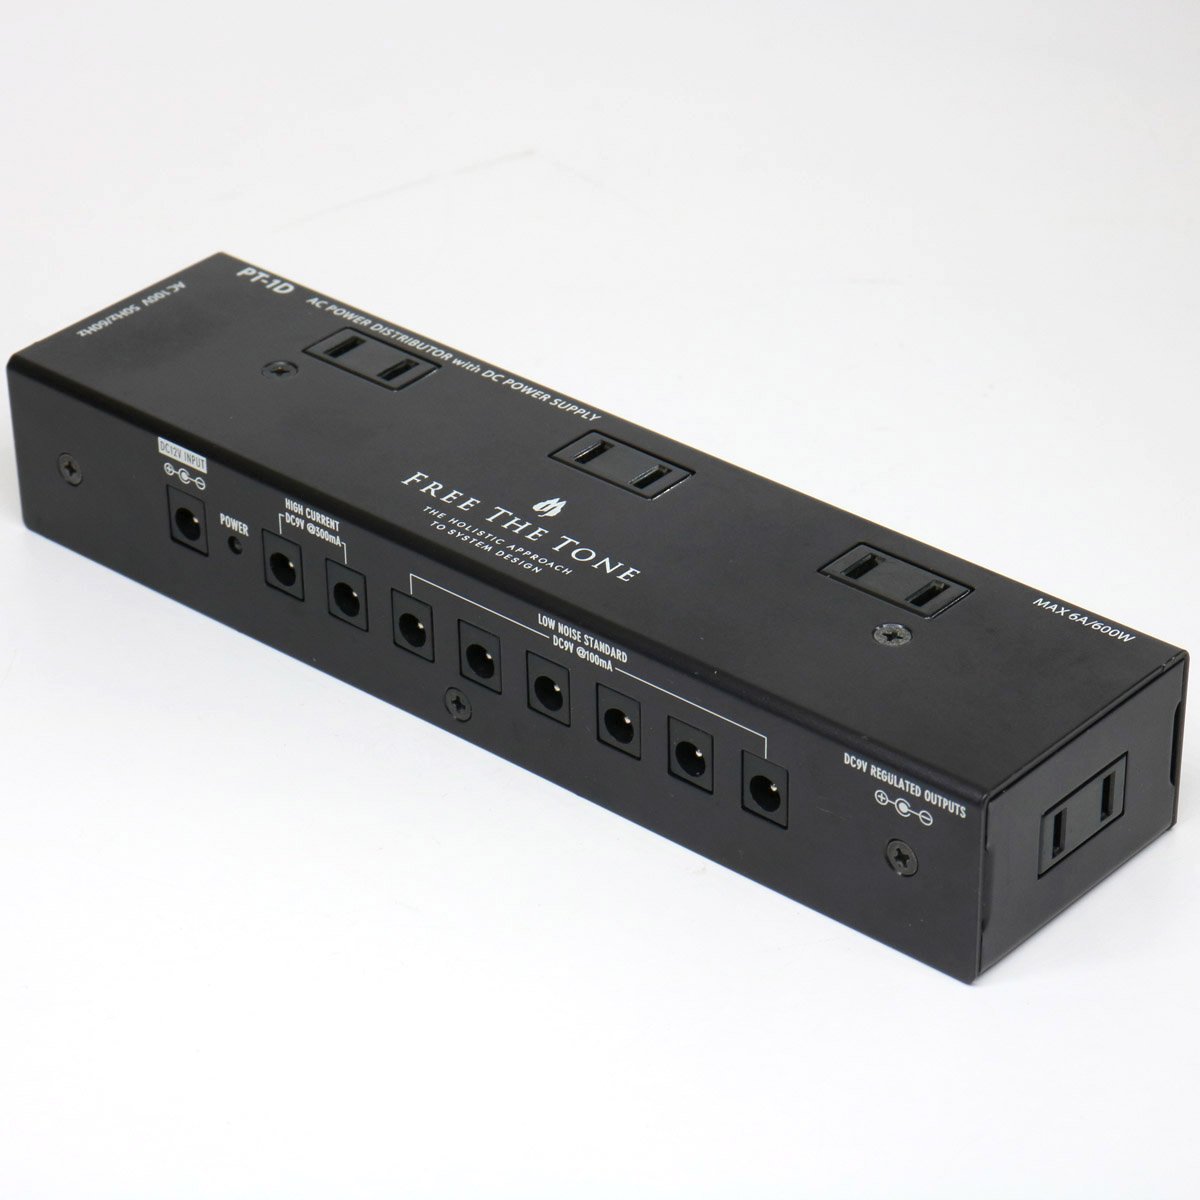 Free The Tone PT-1D / AC Power Distributor with DC Power Supply